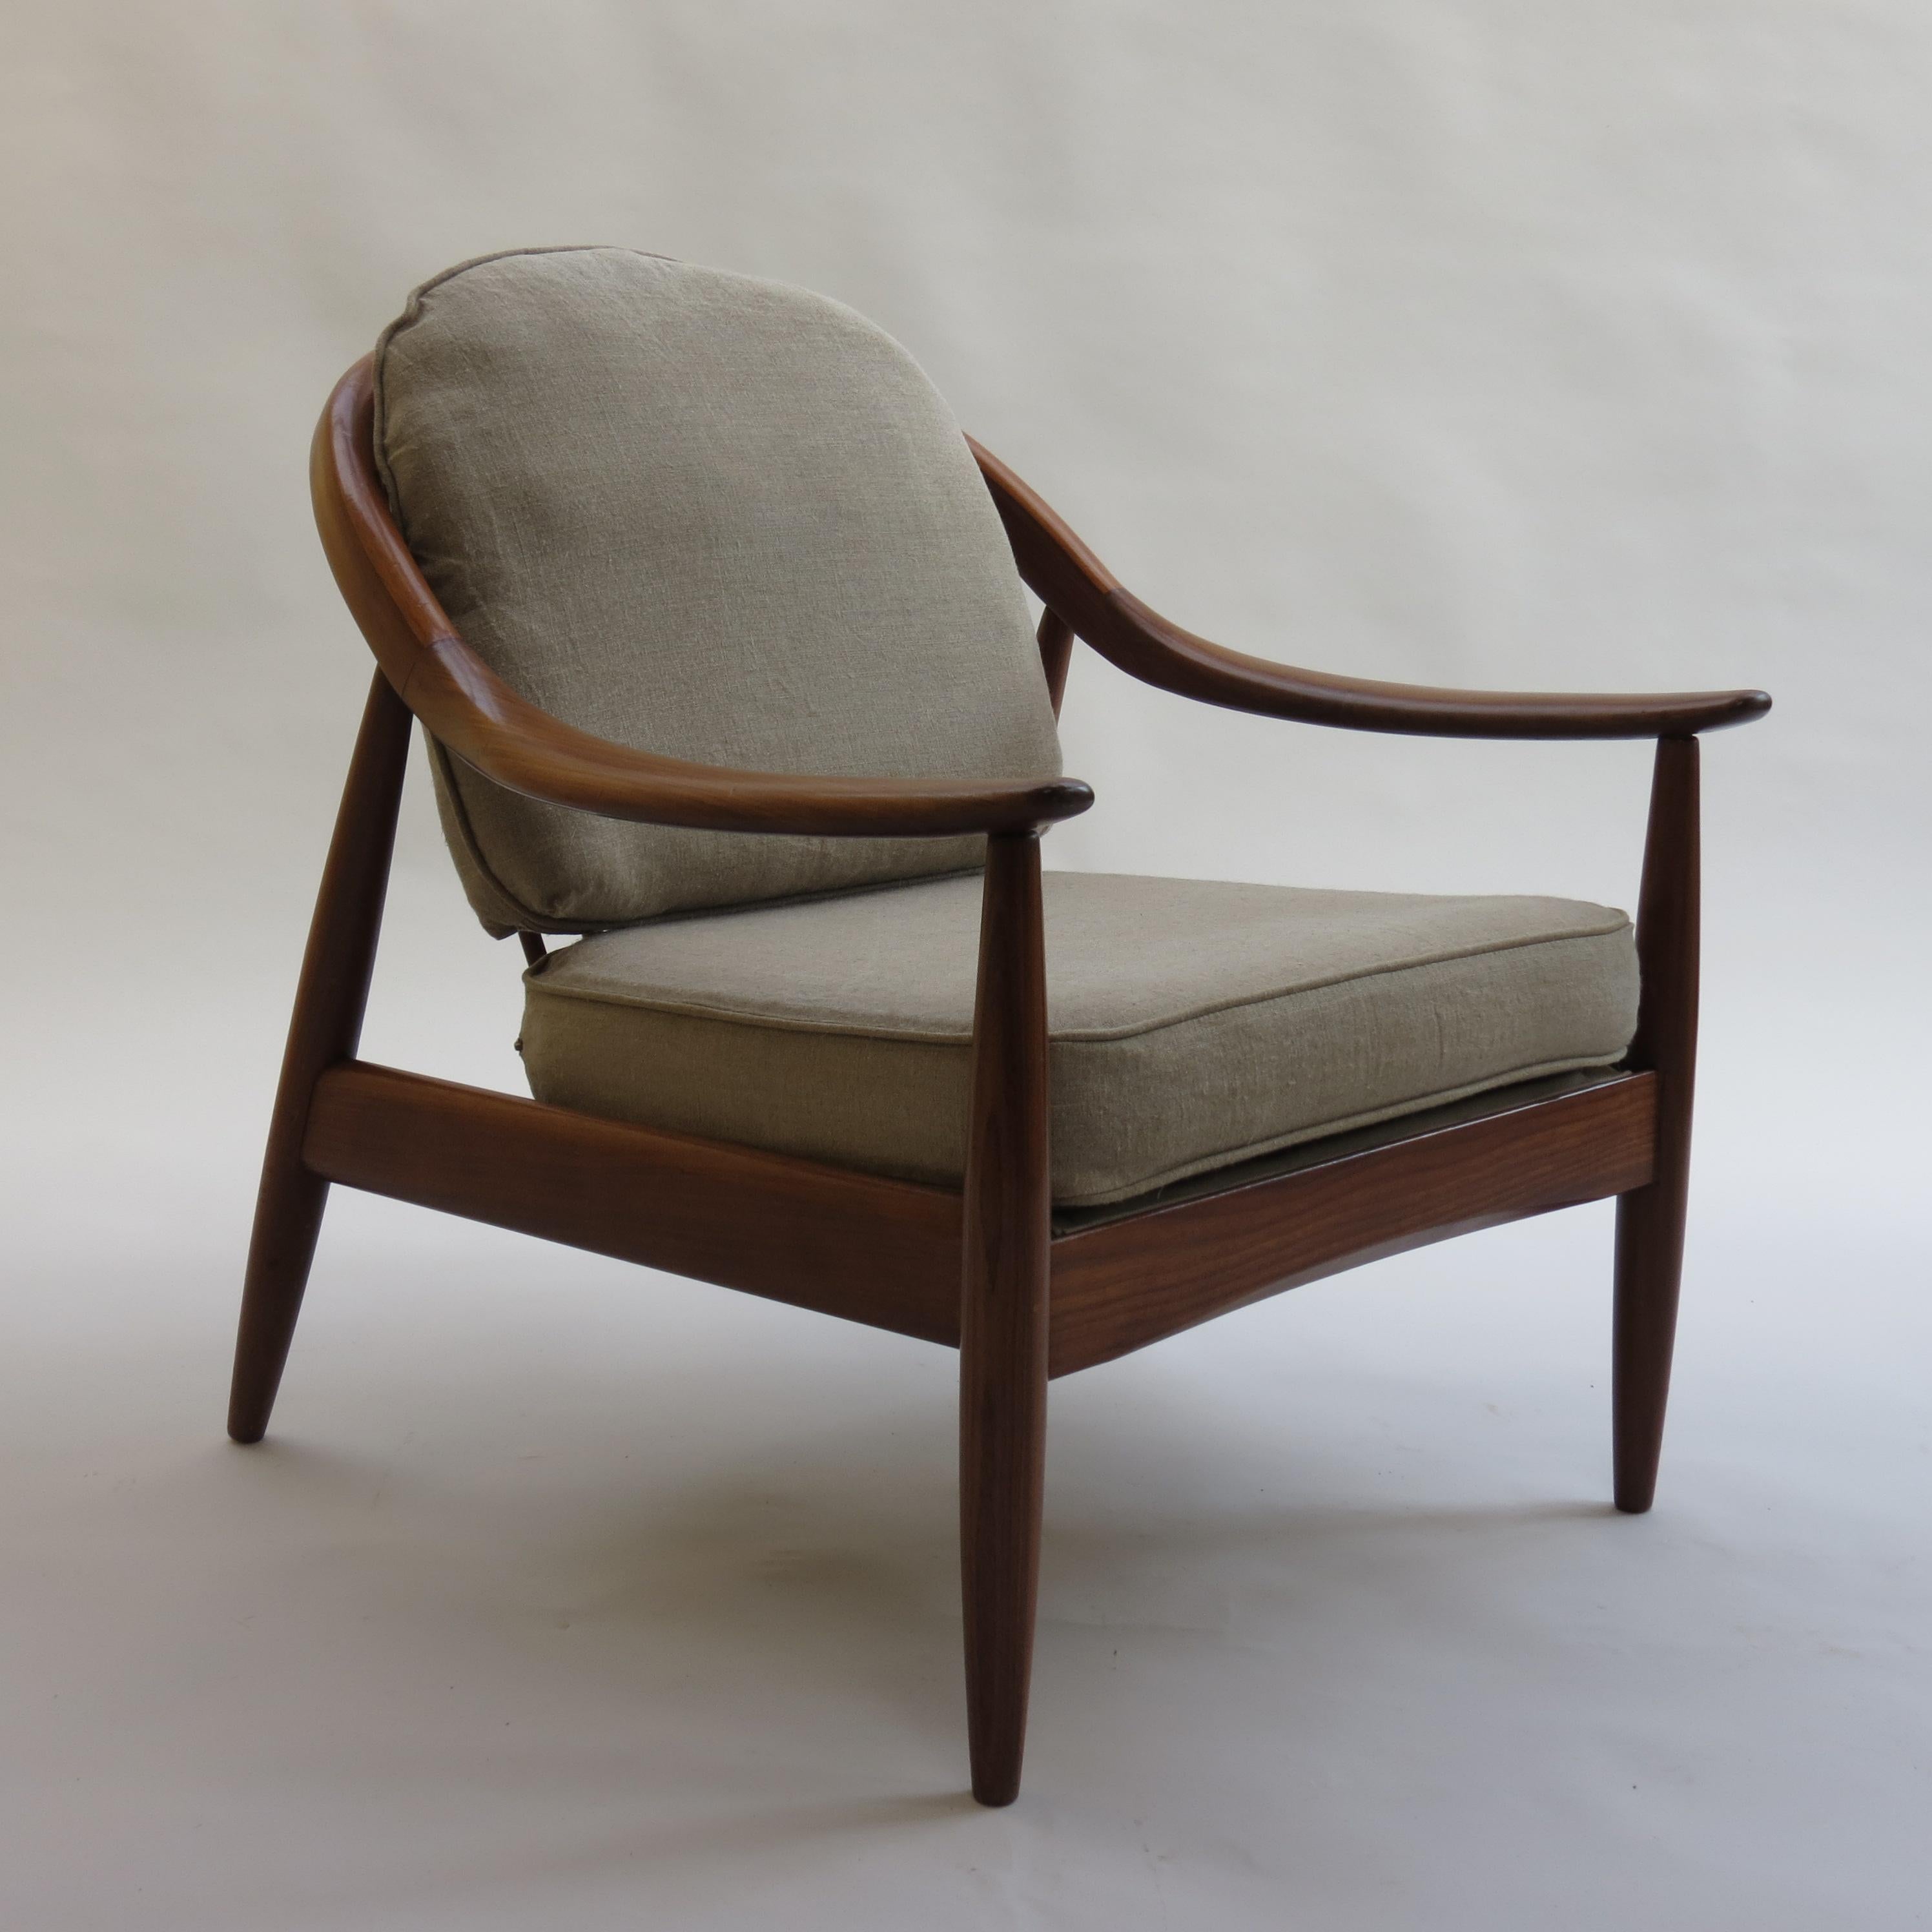 Afrormosia Midcentury Armchair by Greaves and Thomas 1960s B 1